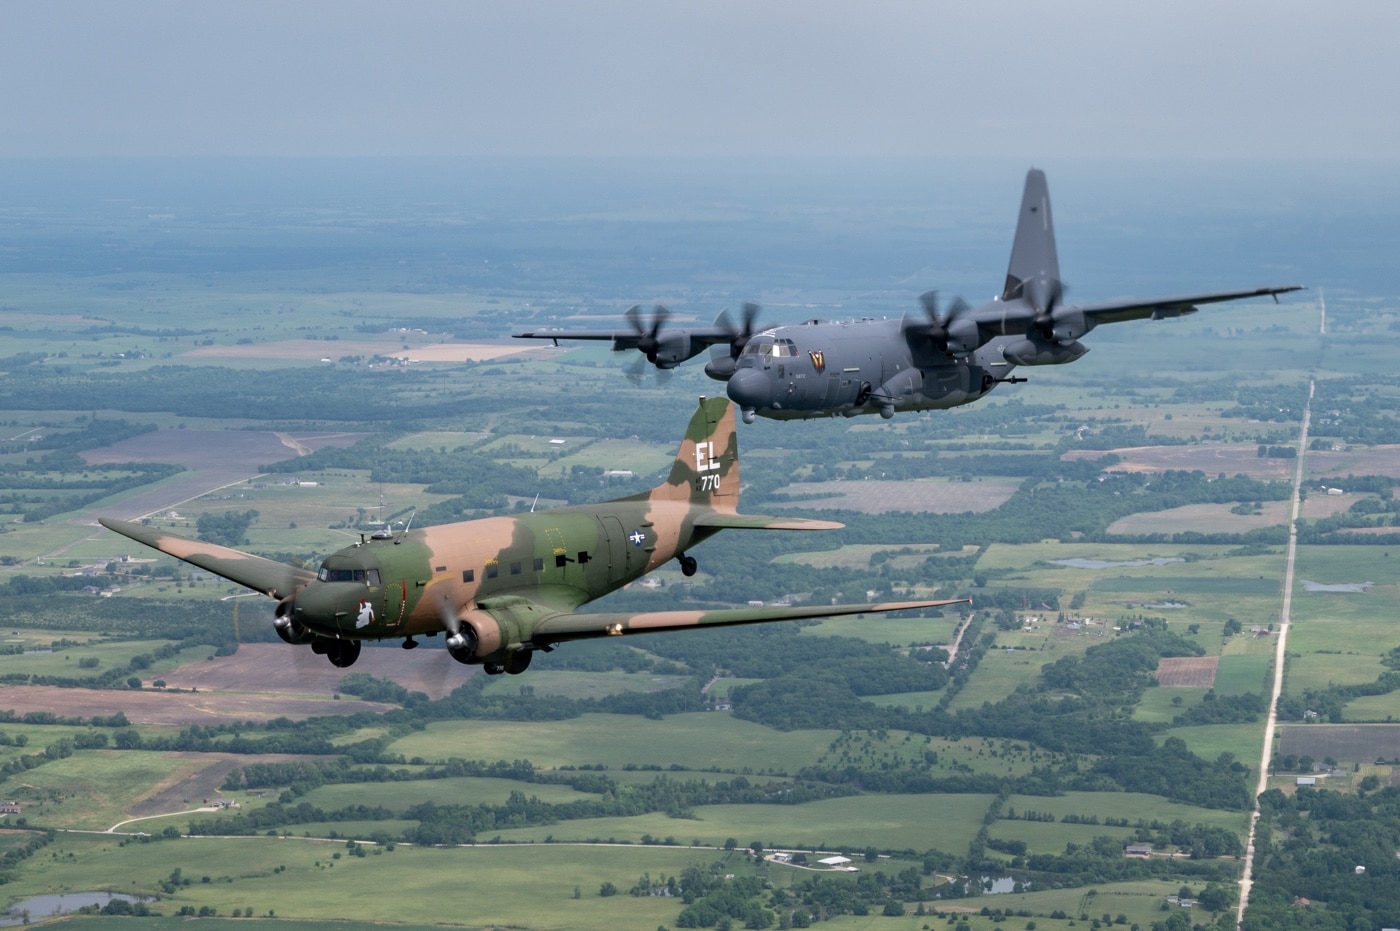 In this photo we see a AC-47 and AC-130 flying in formation in 2021. The memorial flight was in memory of Airman 1st Class John Levitow who was awarded the Medal of Honor. 